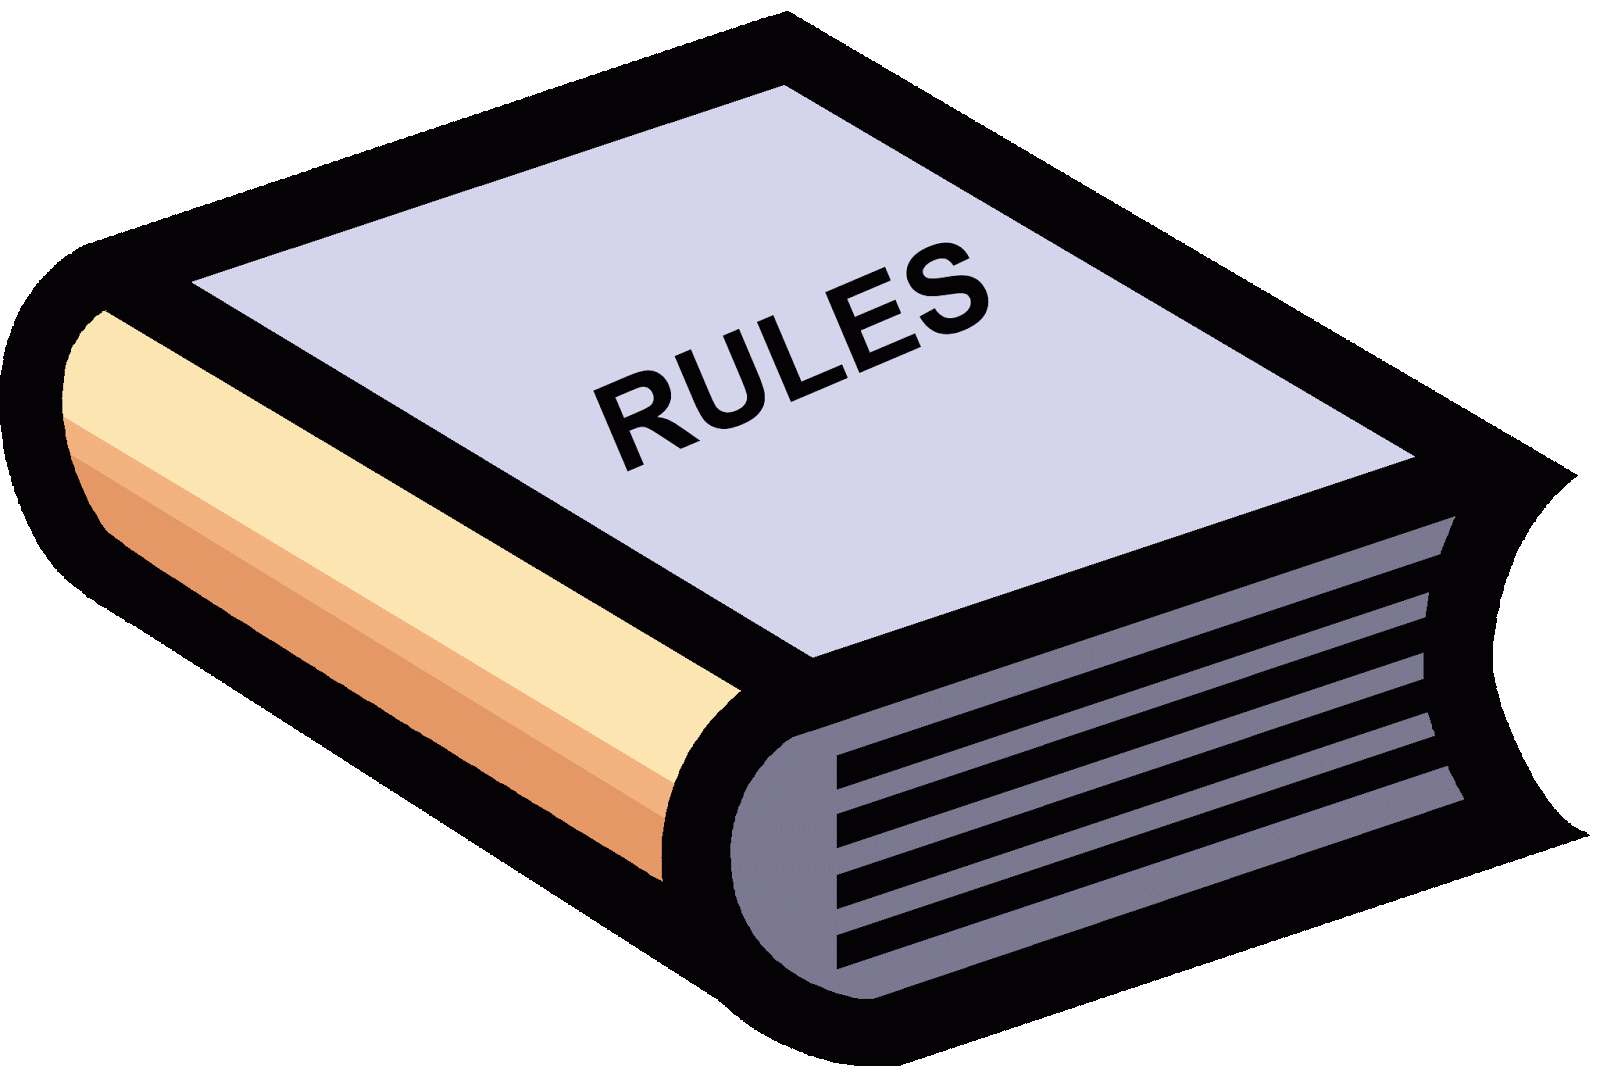 Washington courts have work. Law clipart rule law